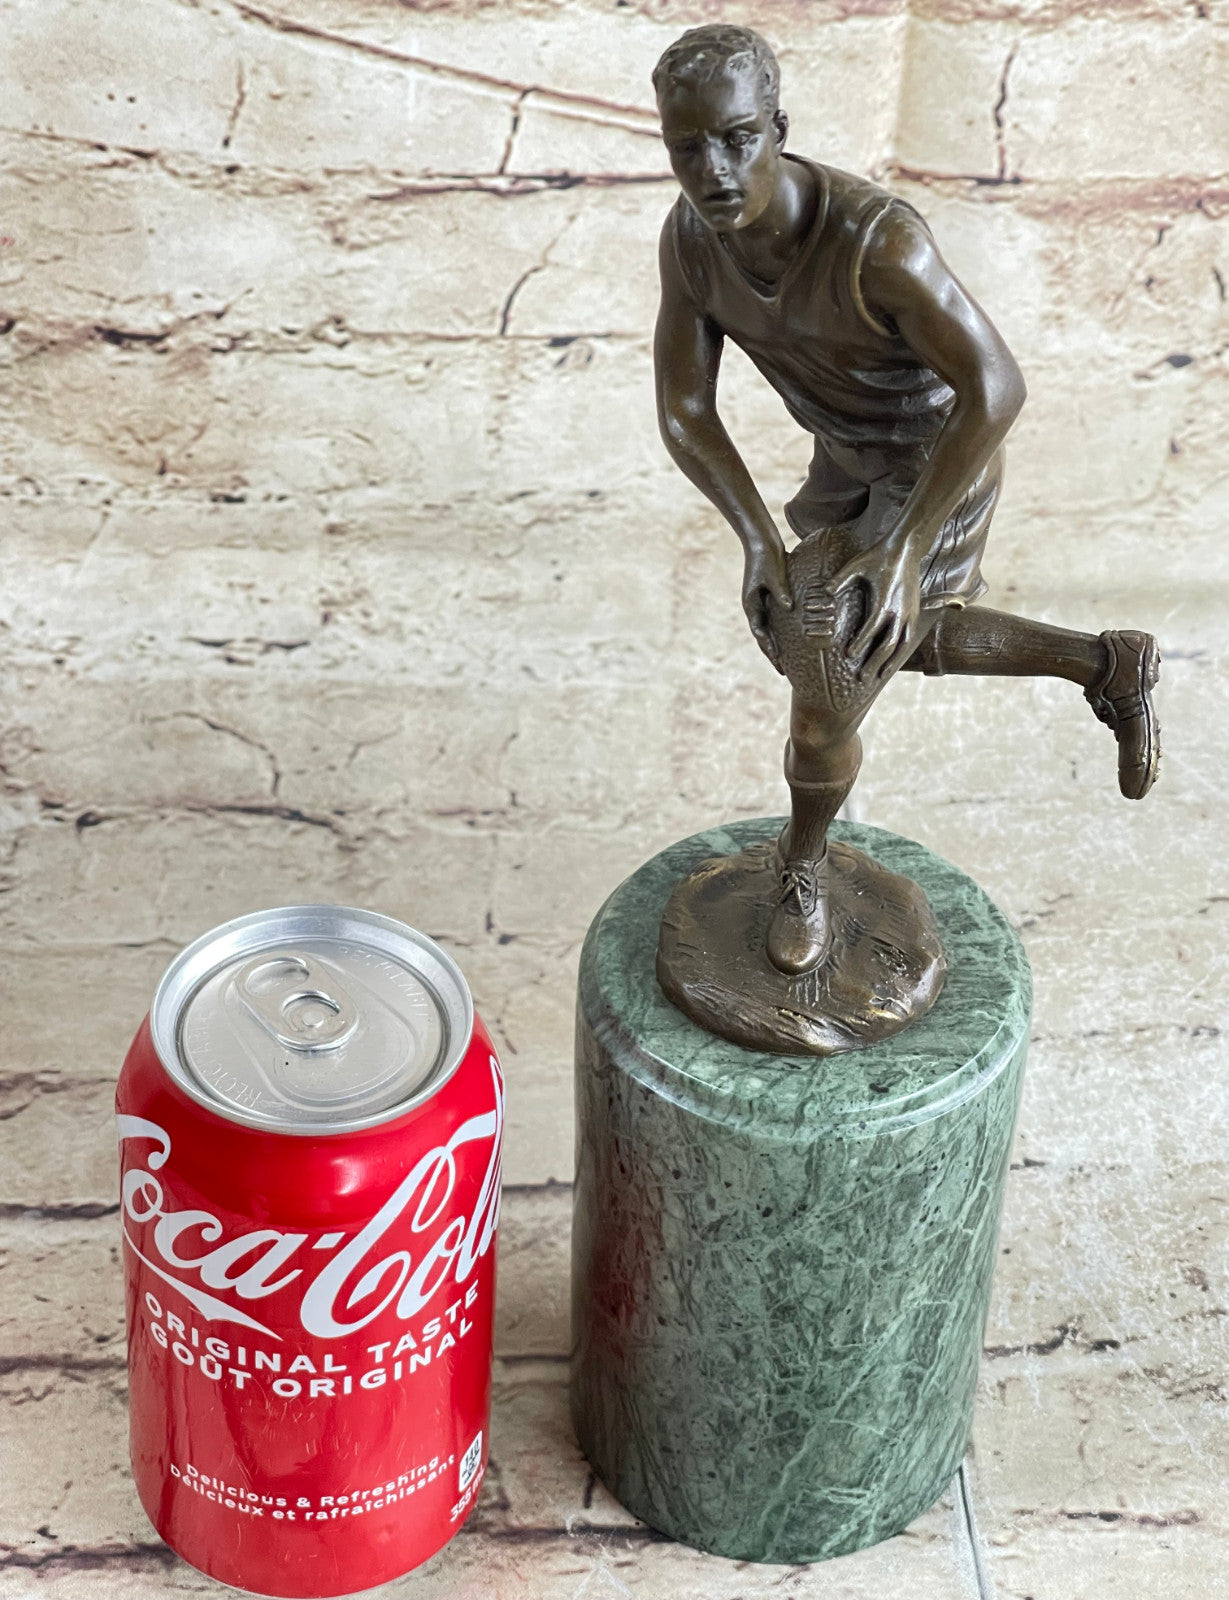 Handcrafted bronze sculpture SALE Trophy Player Football Rugby League Union